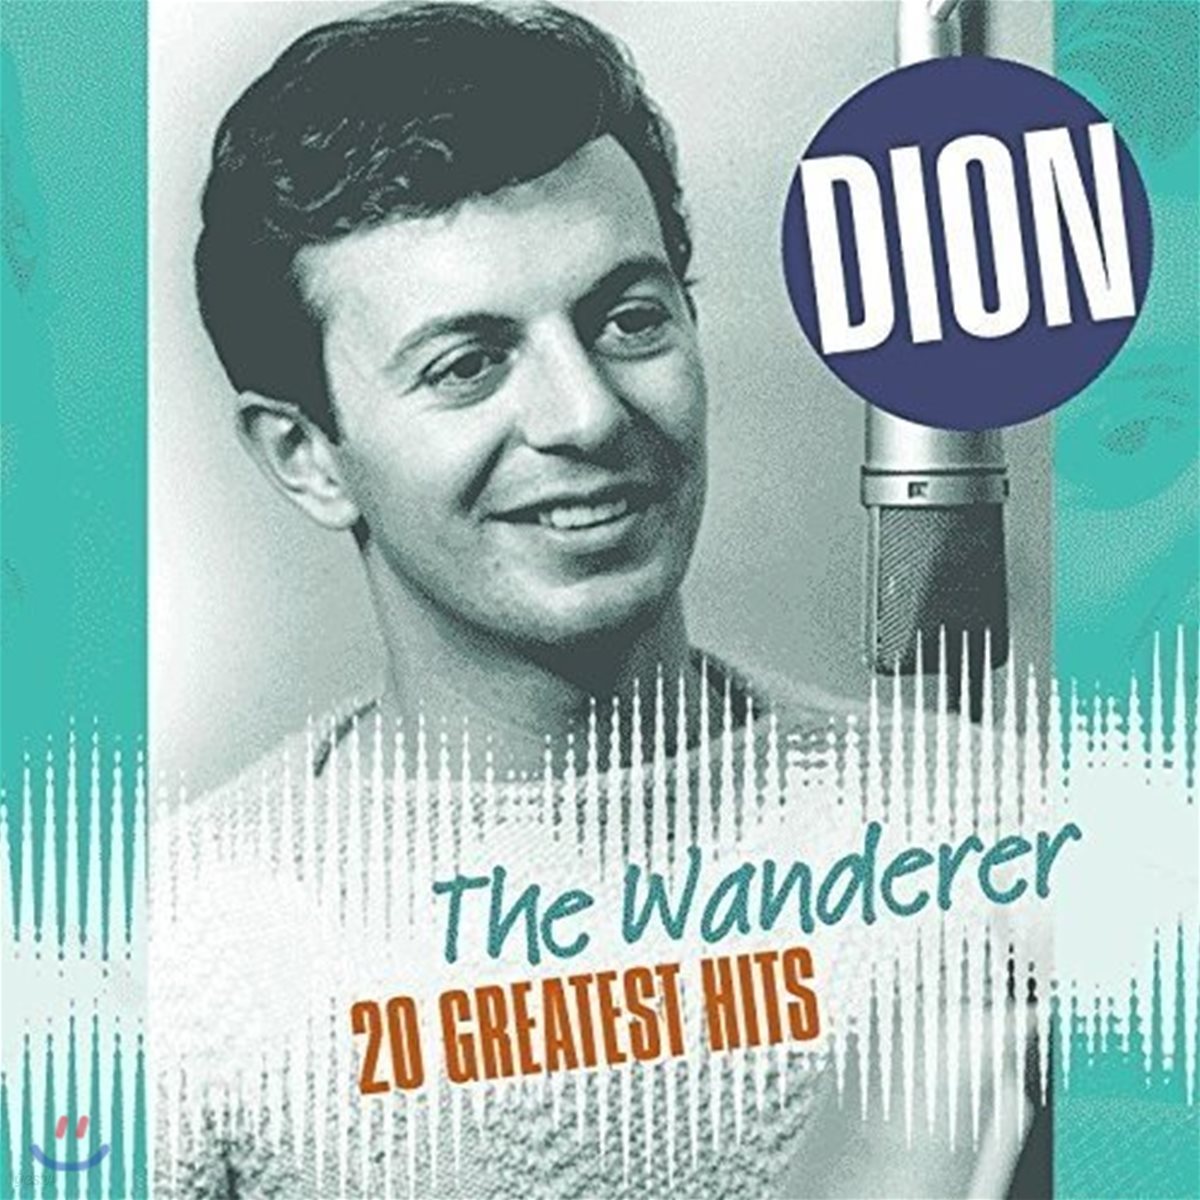 Dion (디온) - Wanderer 20 Greatest Hits [LP]